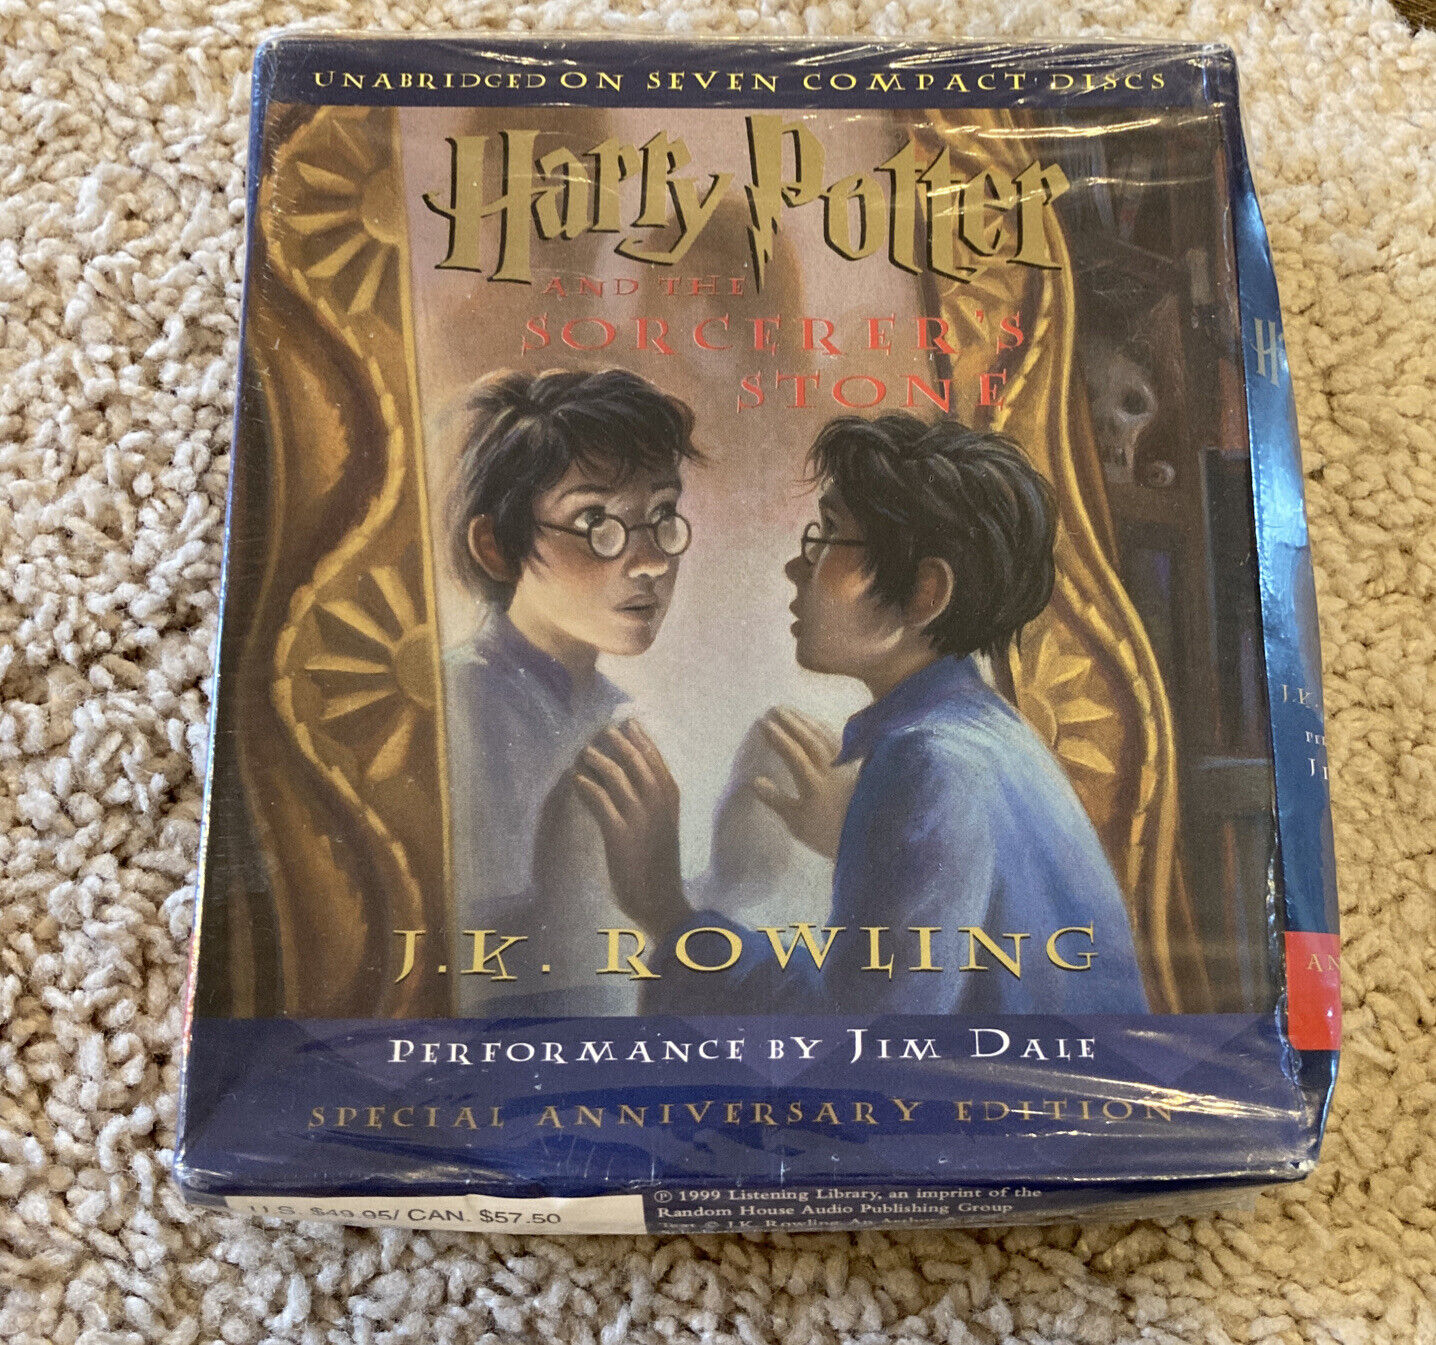 Are there any collector's editions of the Harry Potter audiobooks? 2